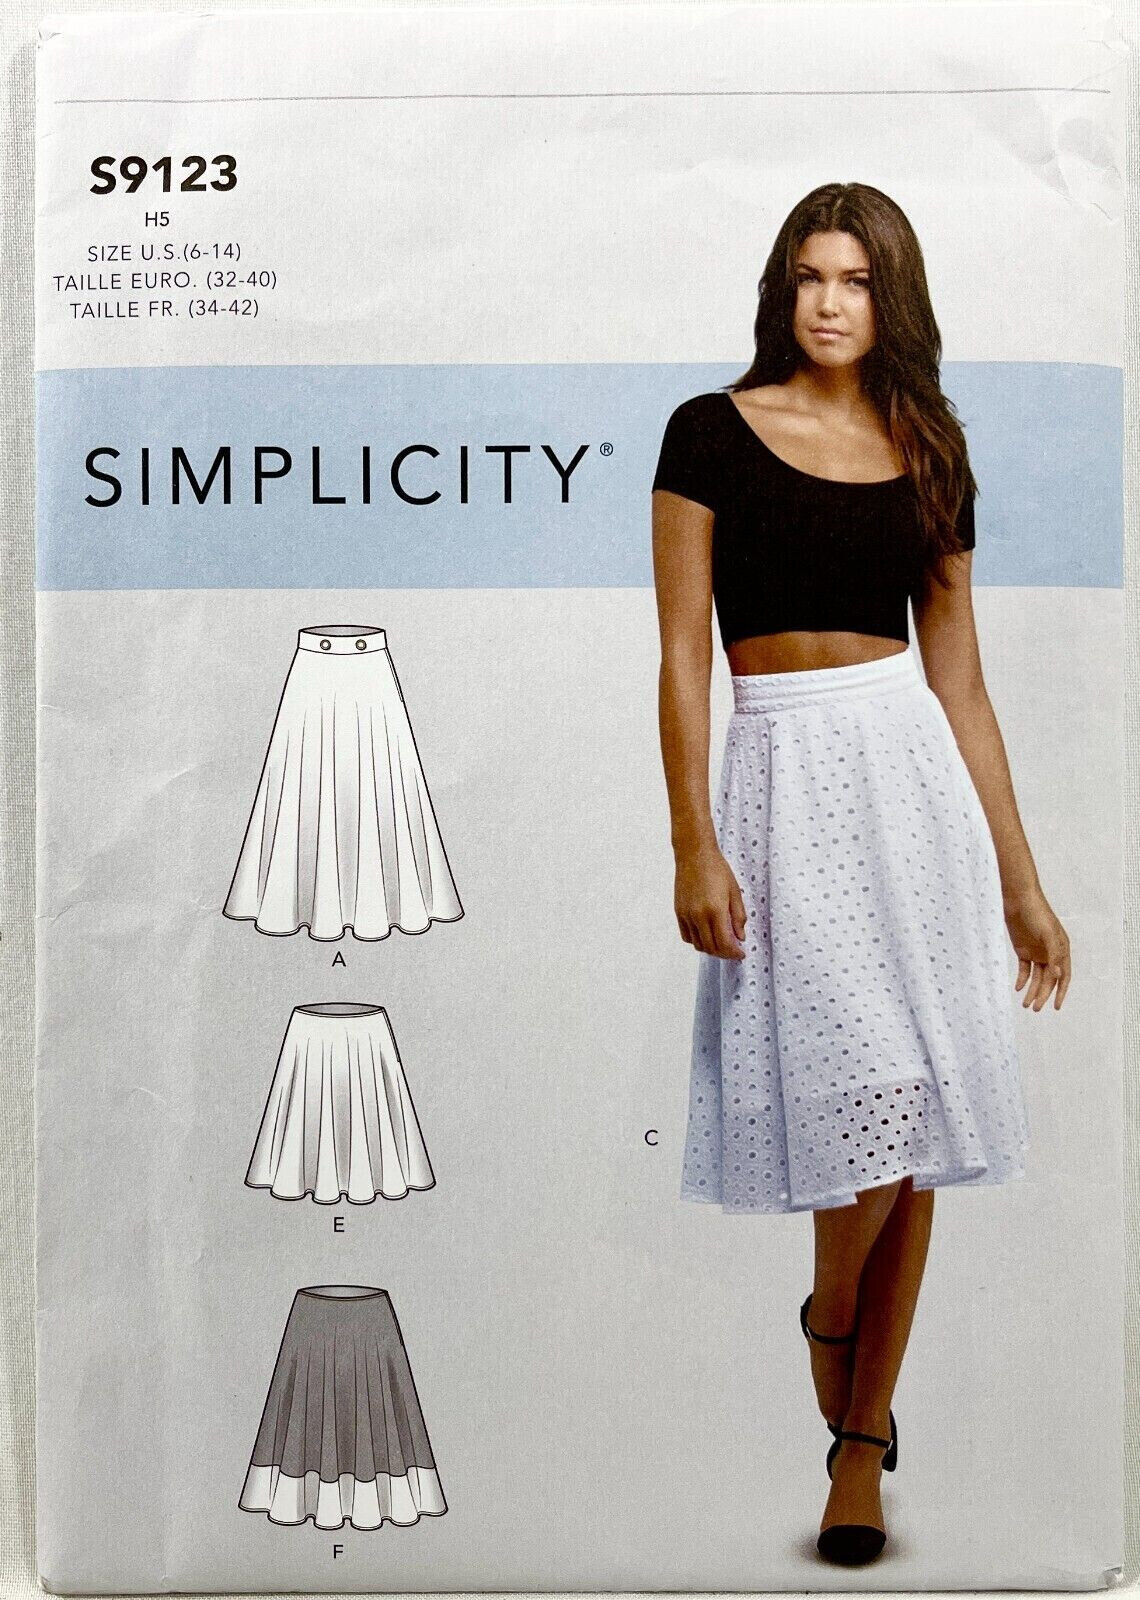 2020 Simplicity Sewing Pattern S9123 Womens 3/4 Circle Skirt Size 6-14 12820